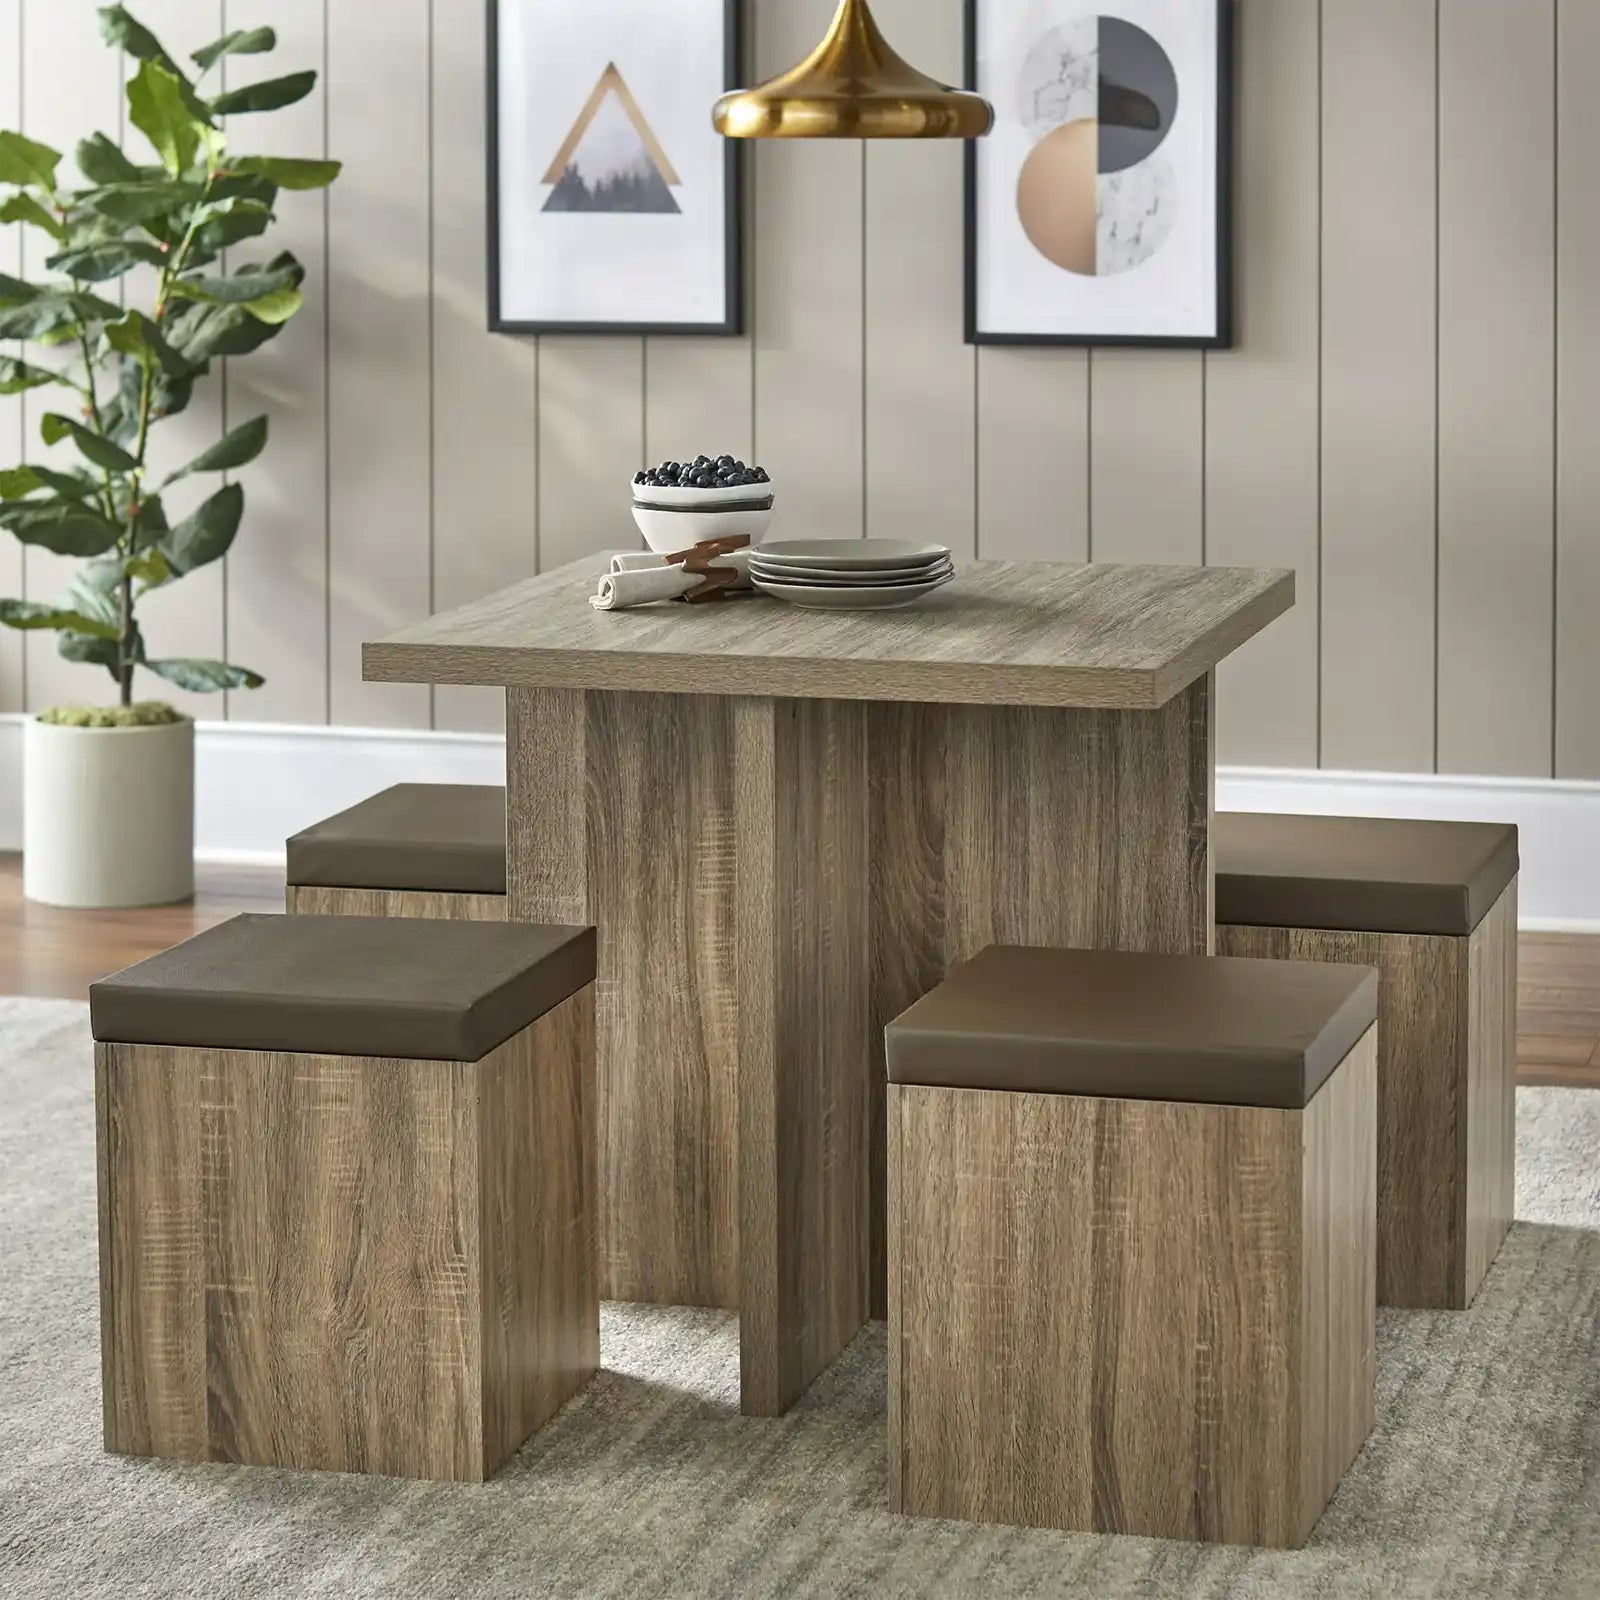 Square Dining Set with Storage Ottoman